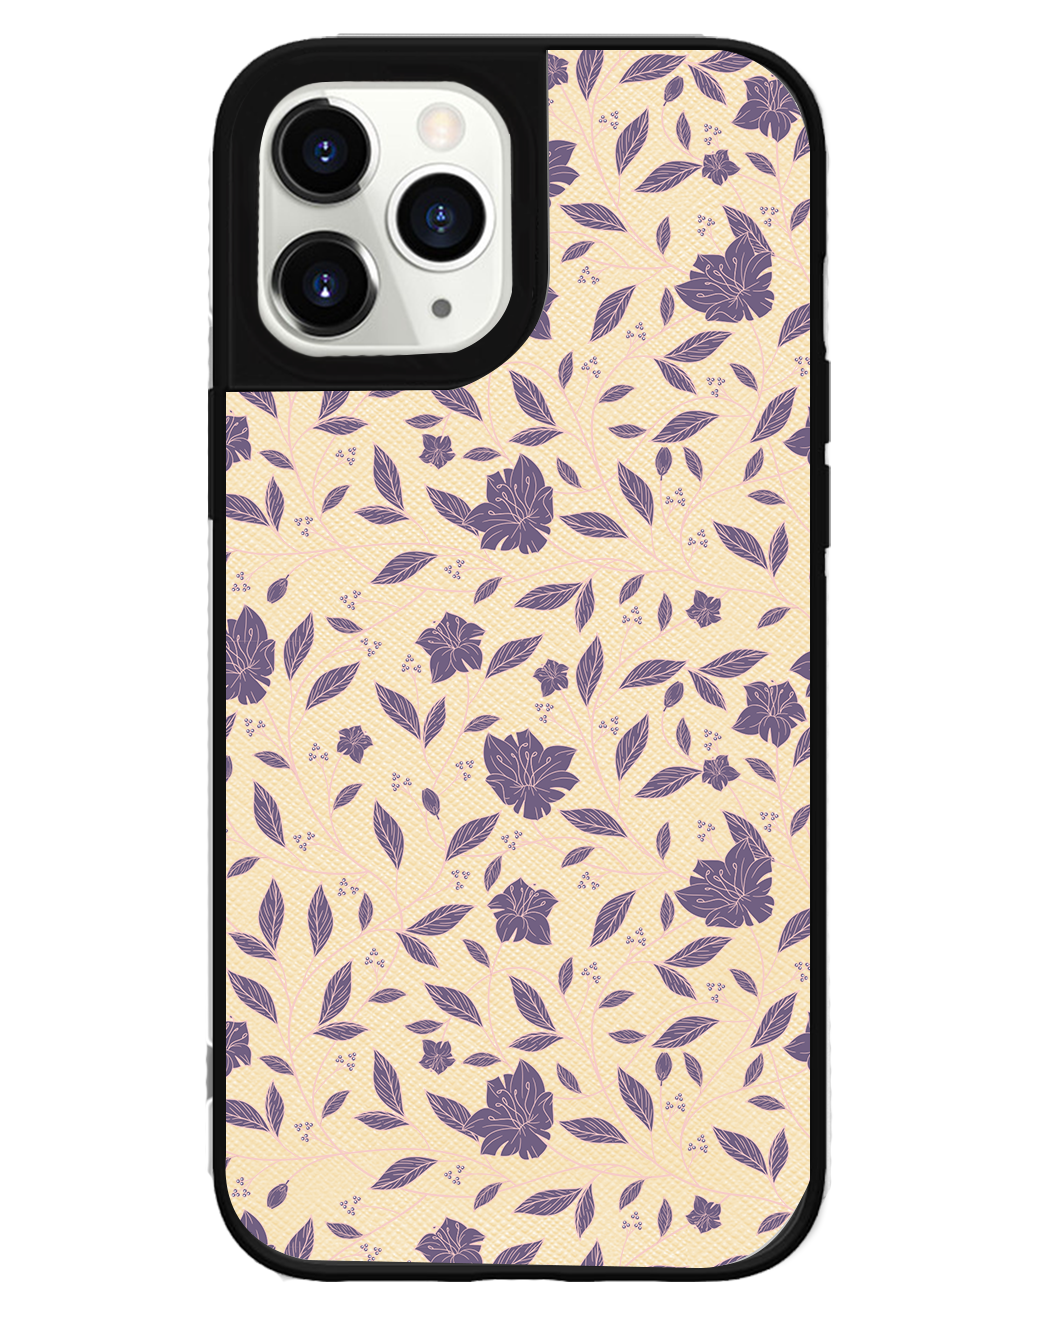 iPhone Leather Grip Case - Sketchy Flower 4.0